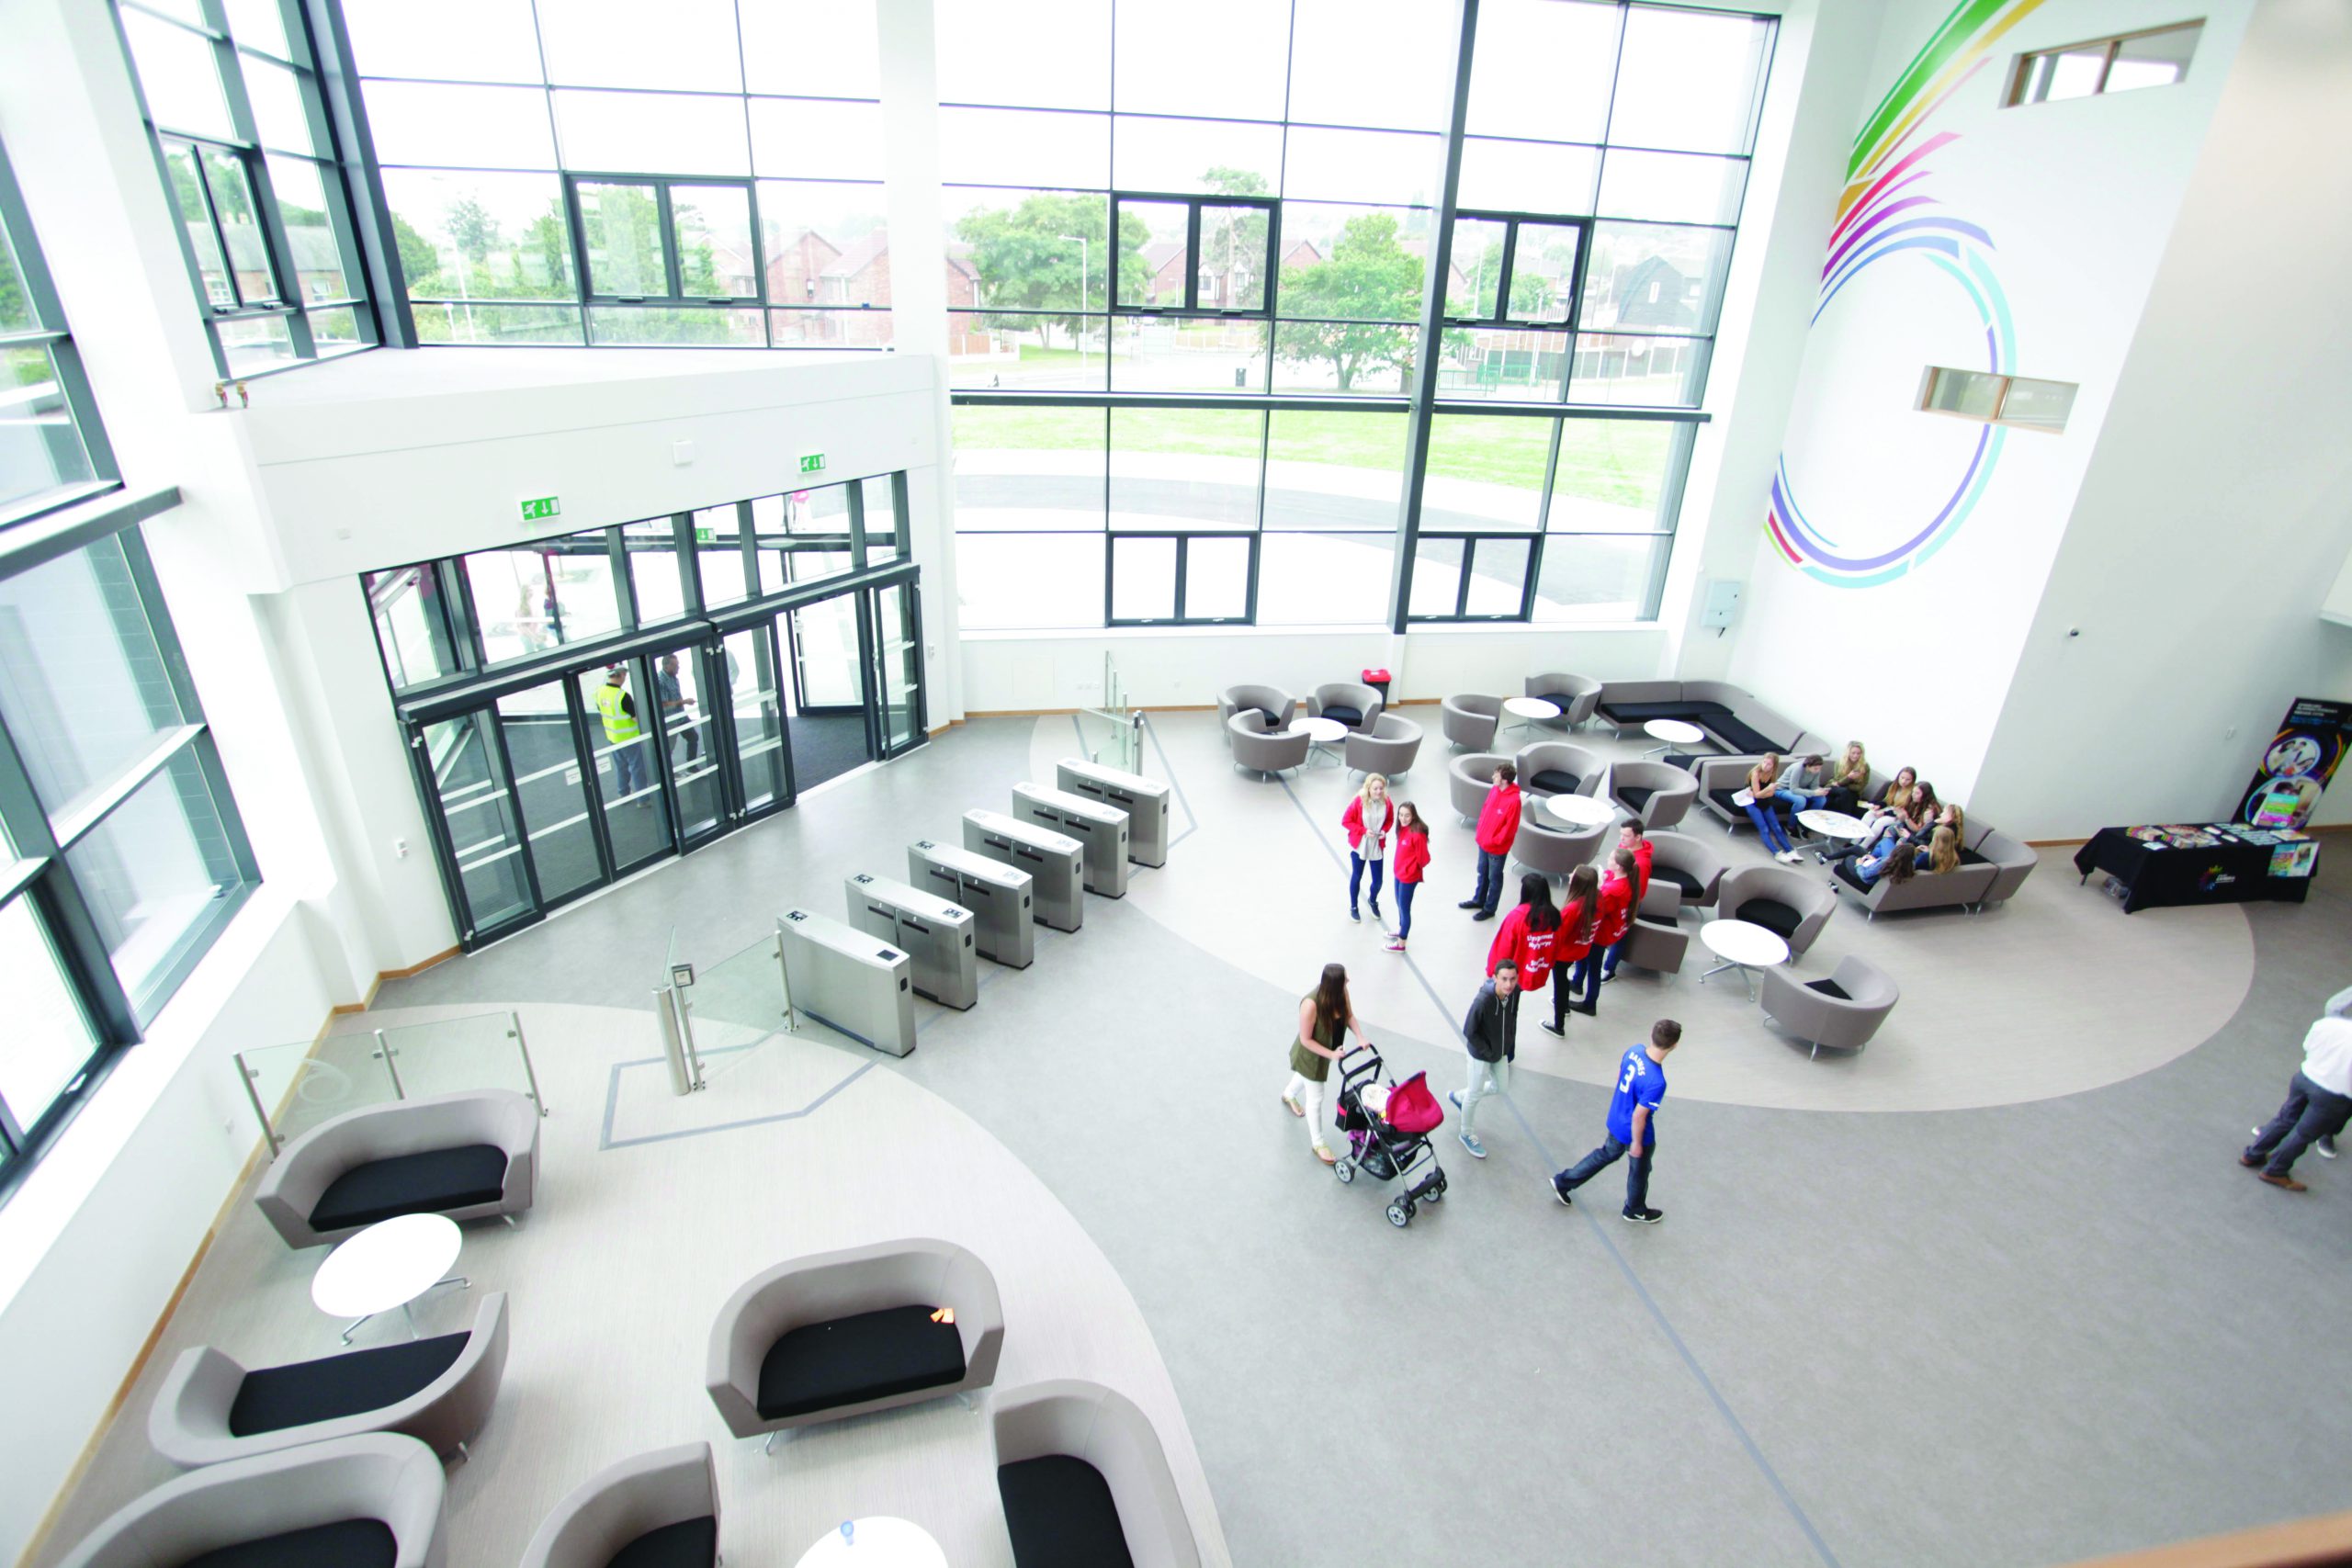 The view of Deeside Sixth Form main area and entrance from a higher point